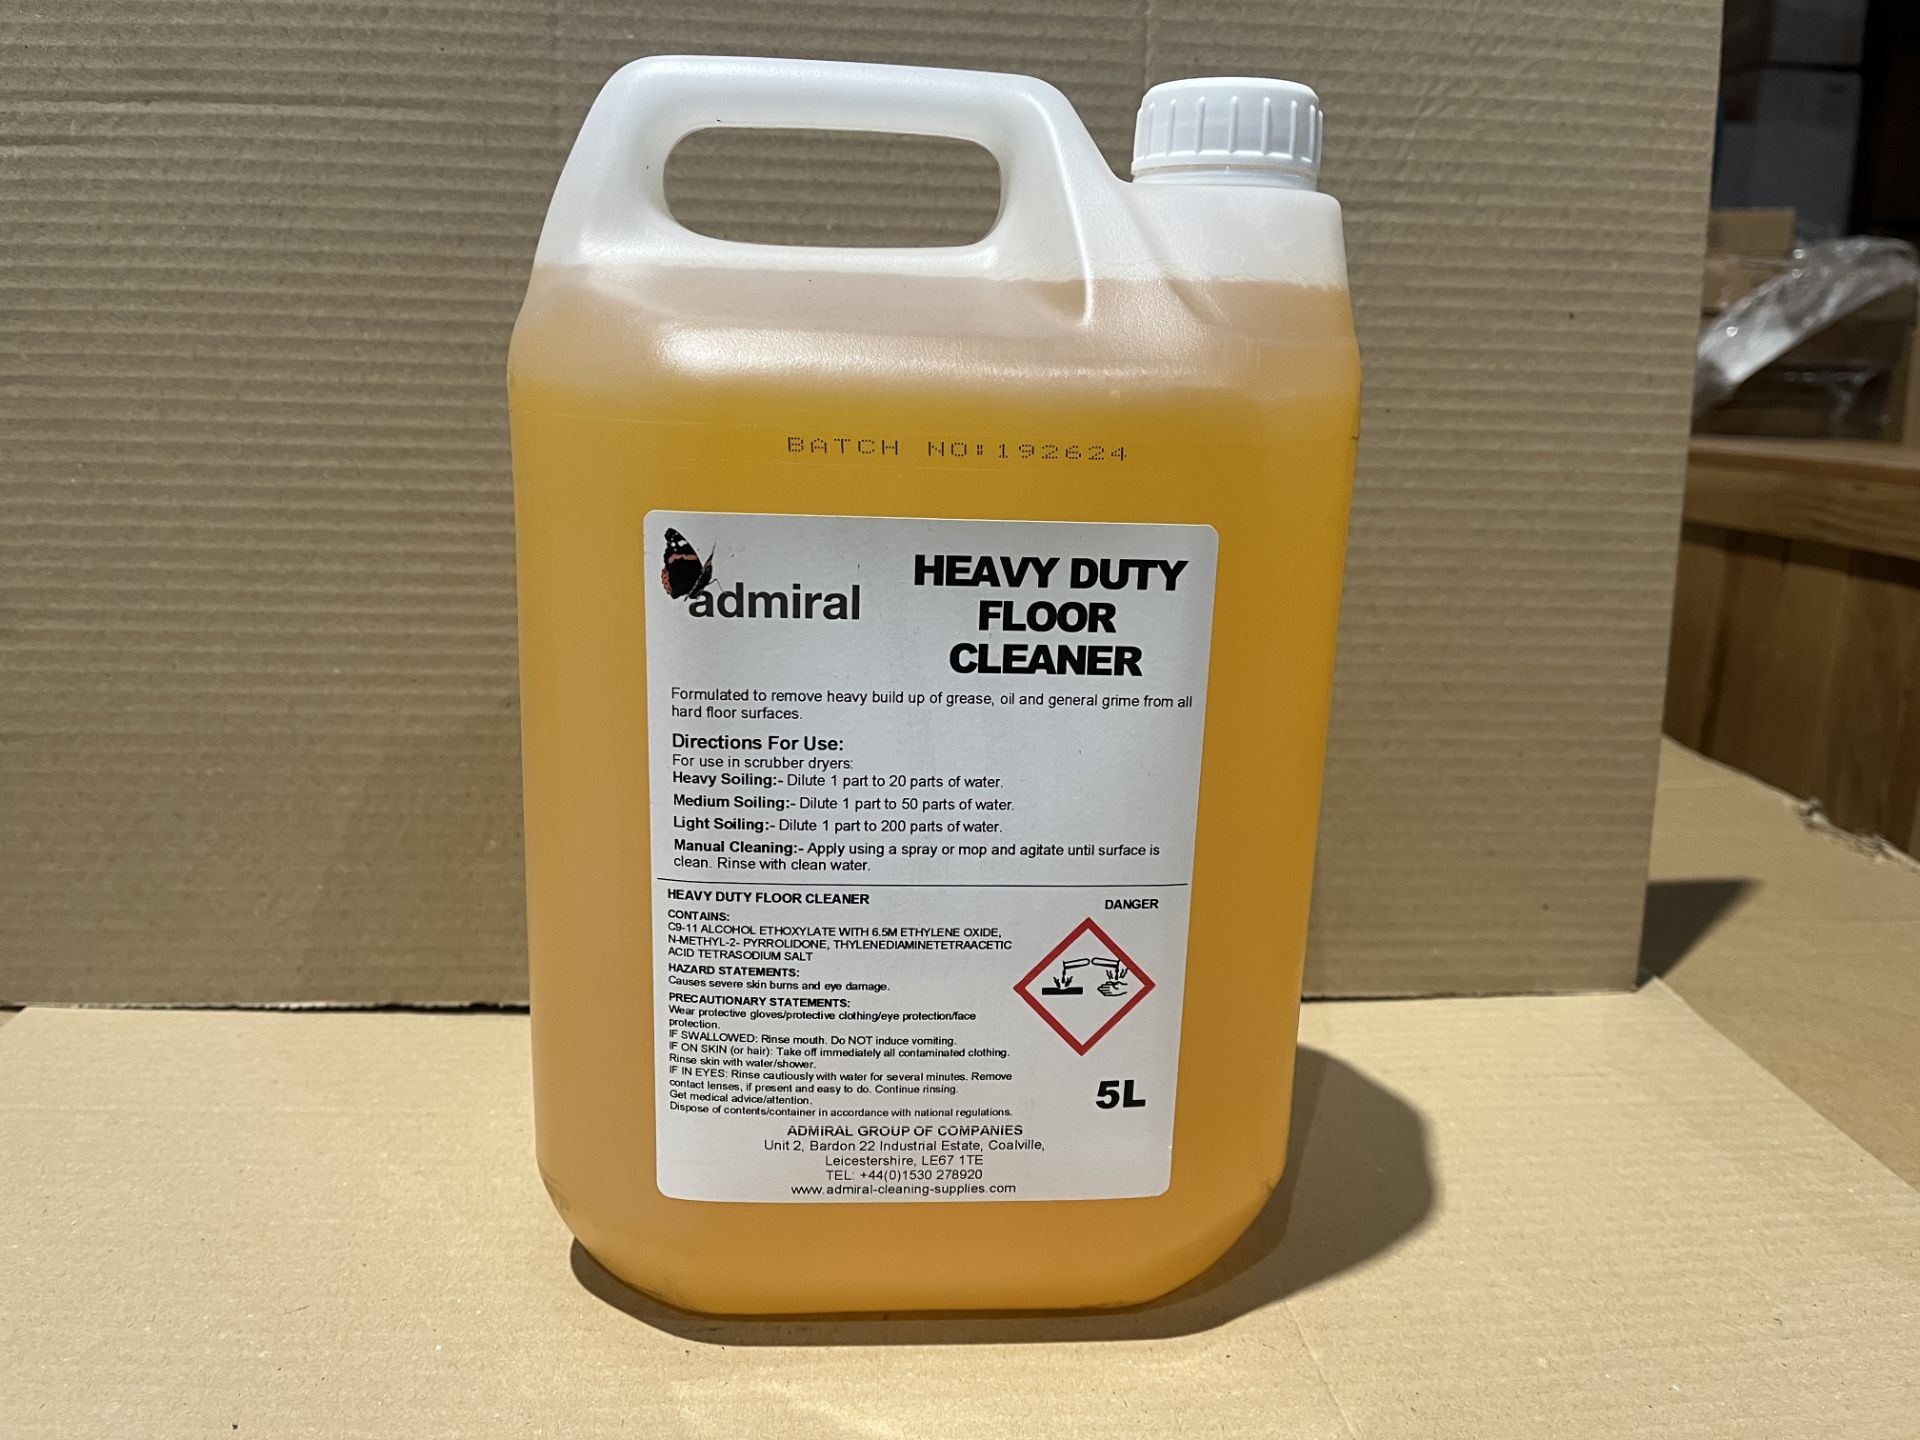 20 X BRAND NEW ADMIRAL PROFESSIONAL 5L HEAVY DUTY FLOOR CLEANER R13-8